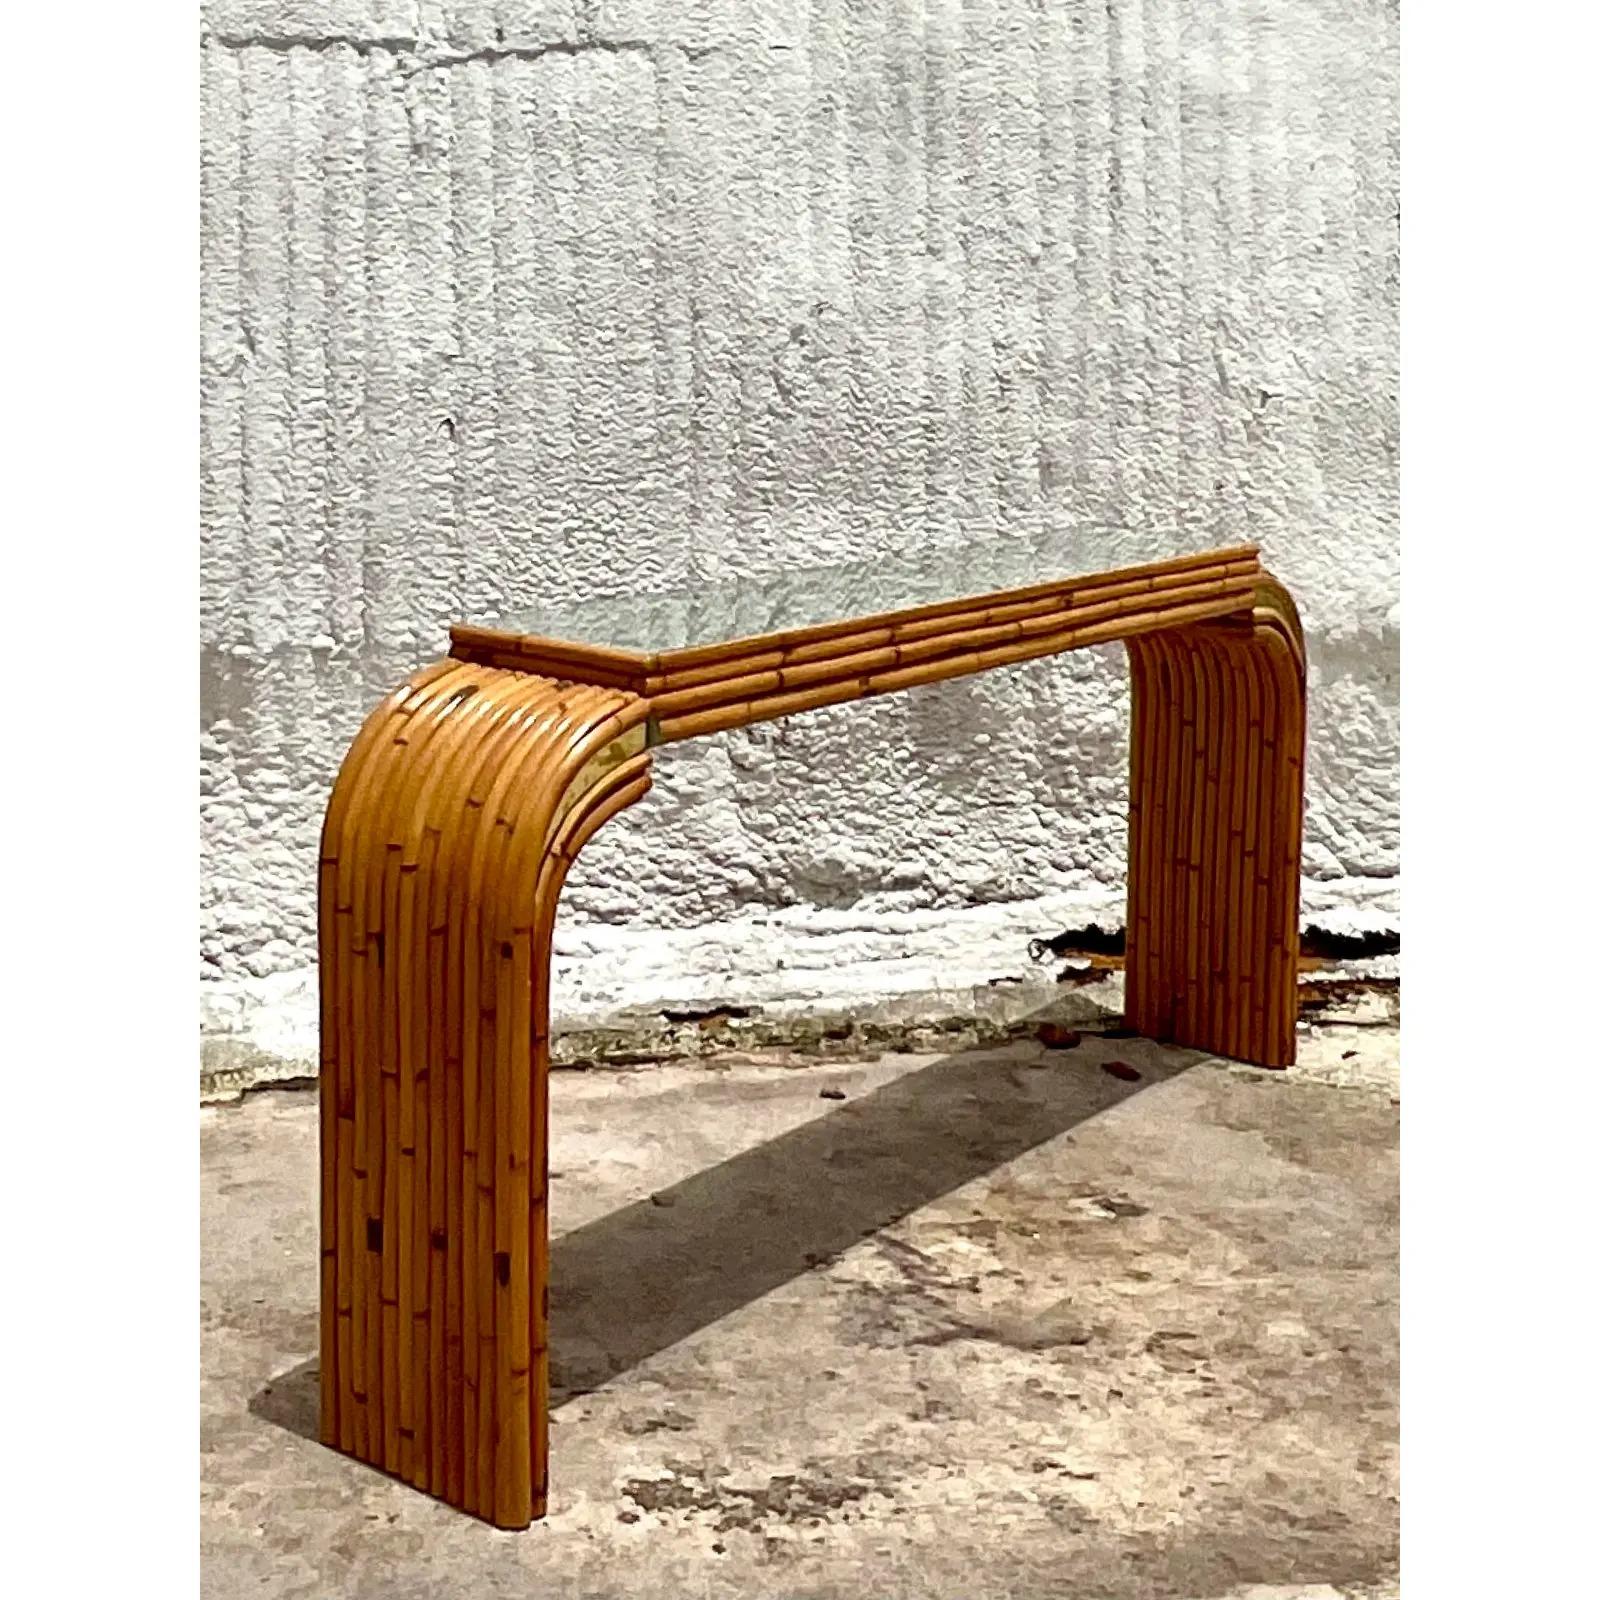 Fabulous vintage bamboo console table. Beautiful waterfall shape with brass detail inset panels. Matching mirror also available. Acquired from a Palm Beach estate.